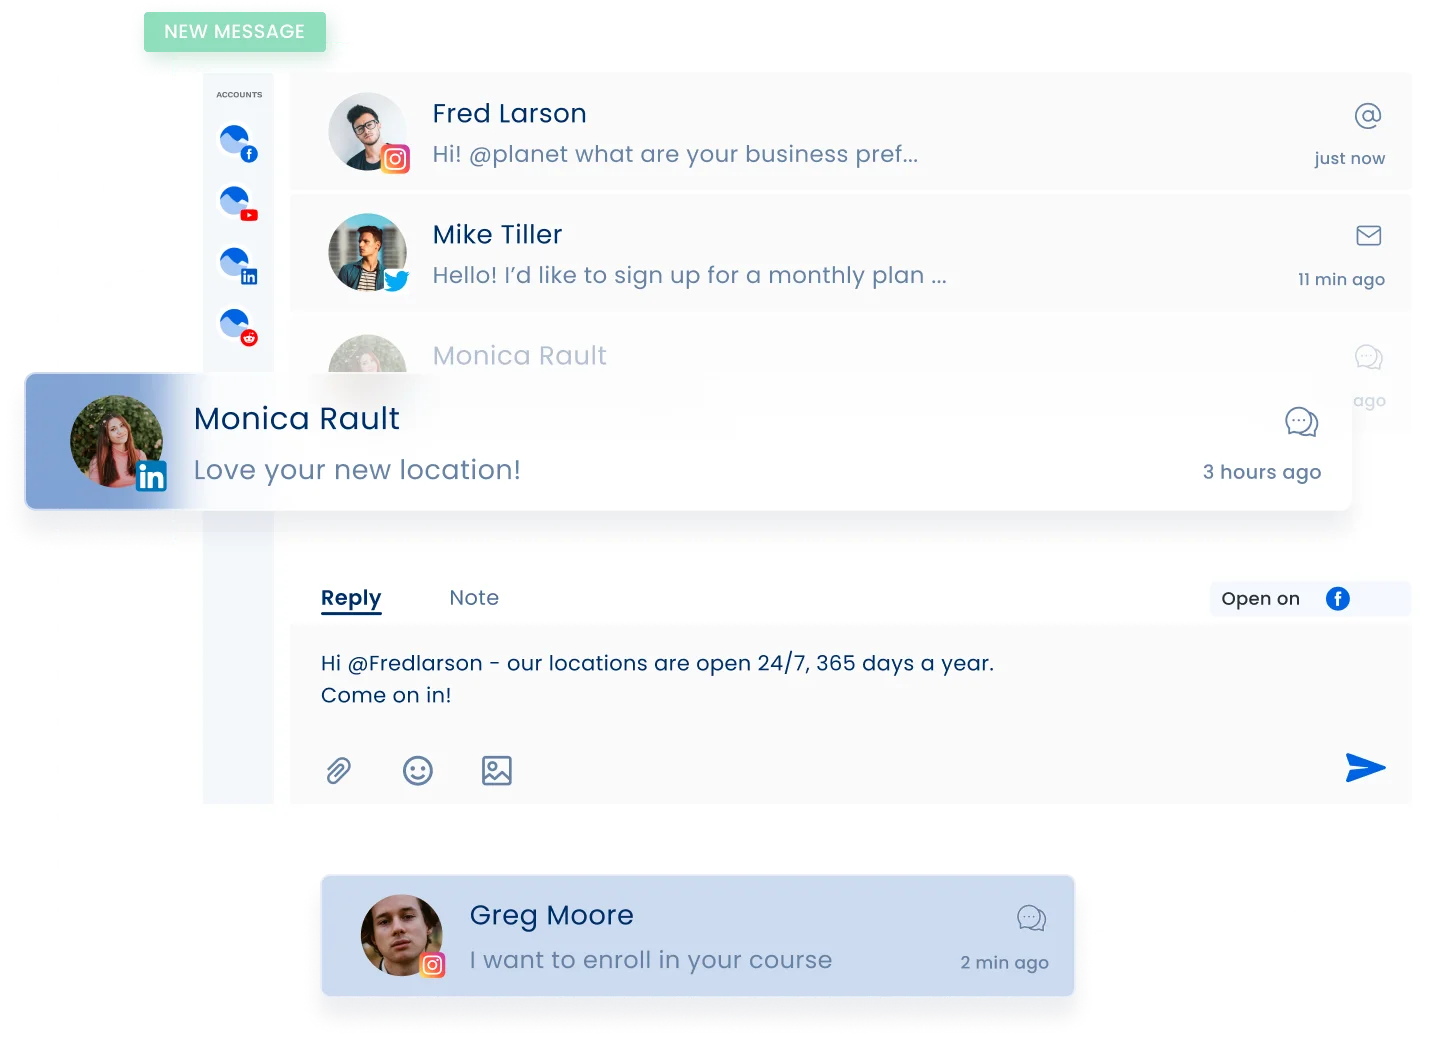 Build relationships with your followers, and easily manage your social media messages, comments, and reviews in one place.